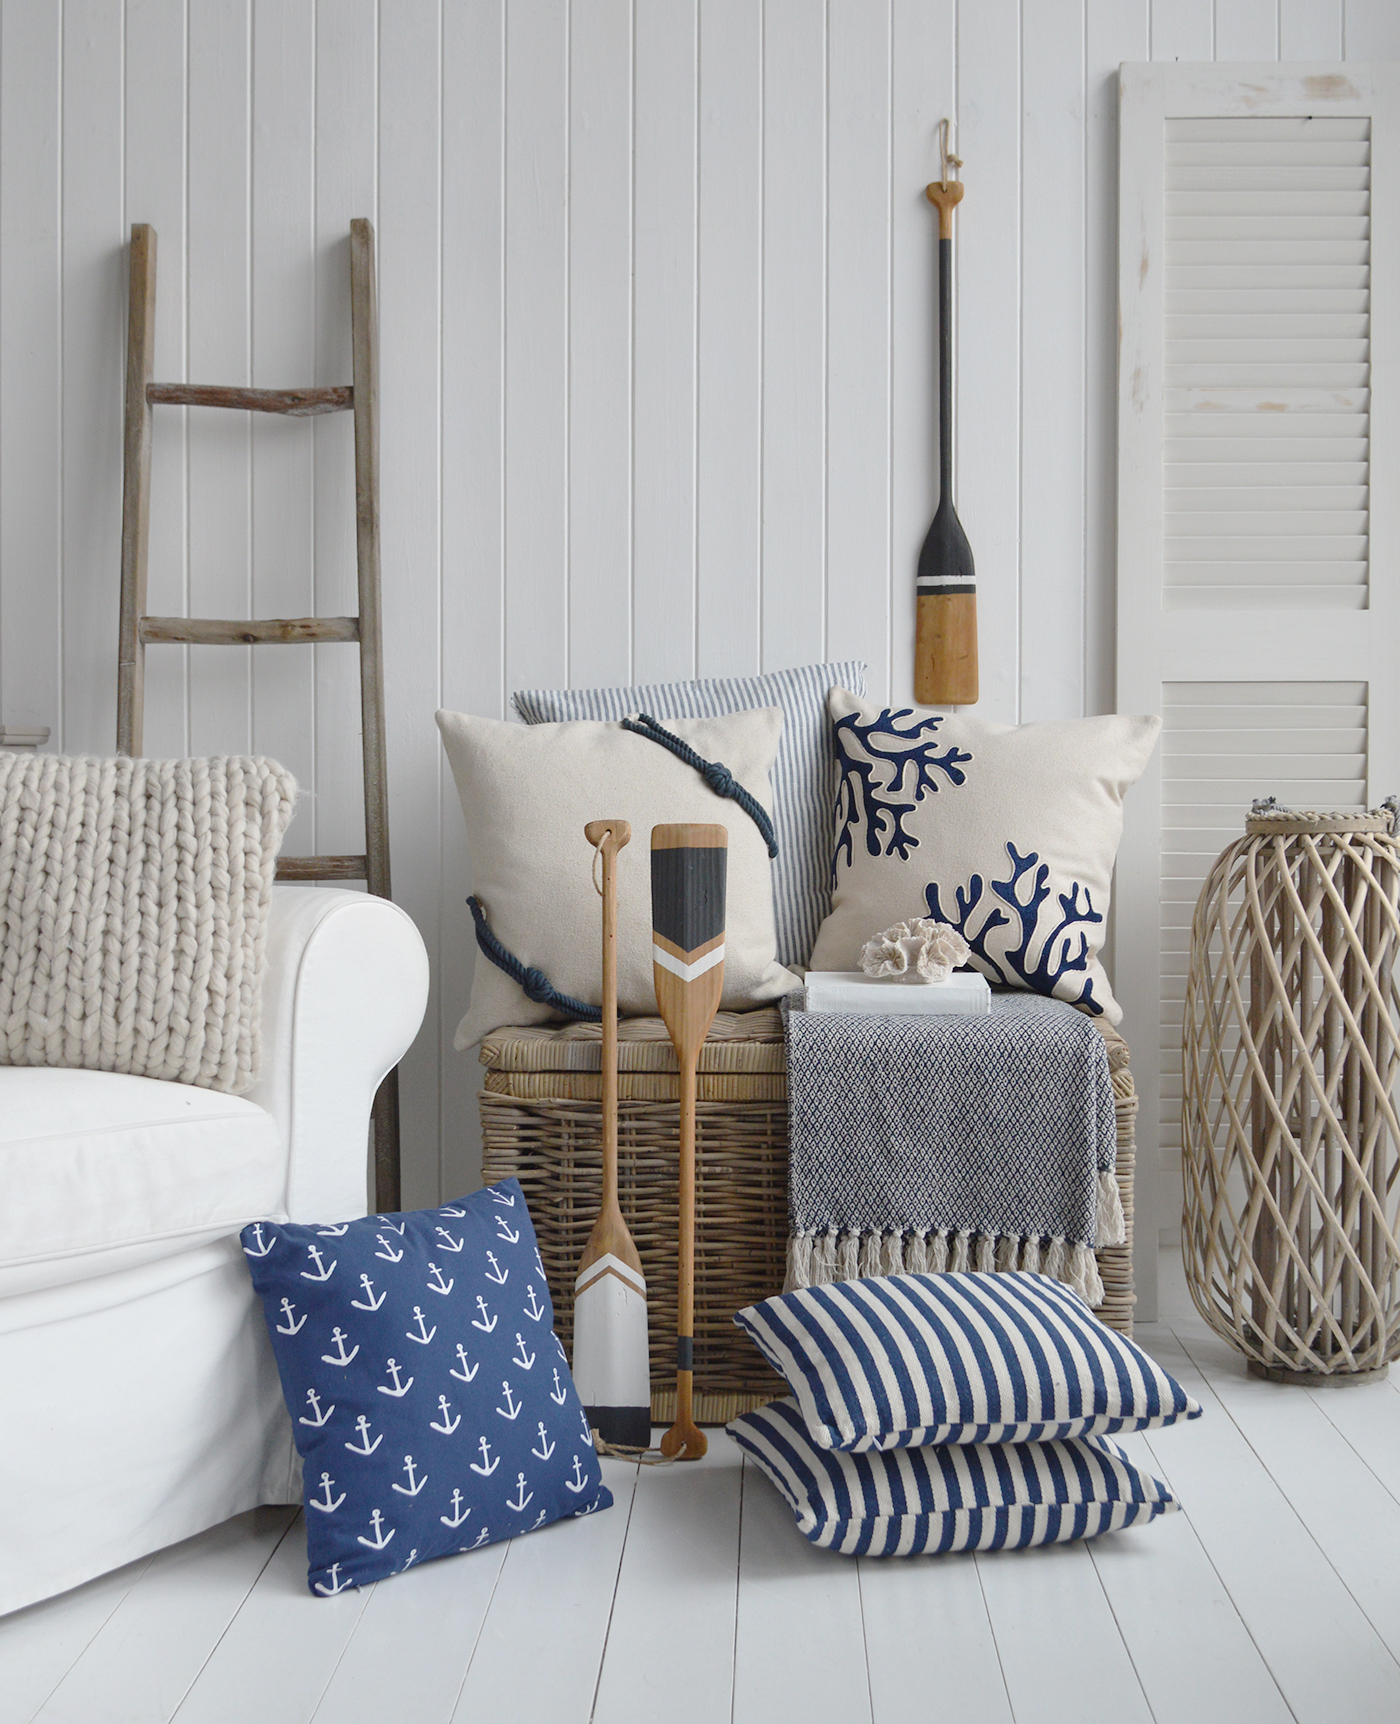 White and blue cushions, pillows and throws to soften the feel